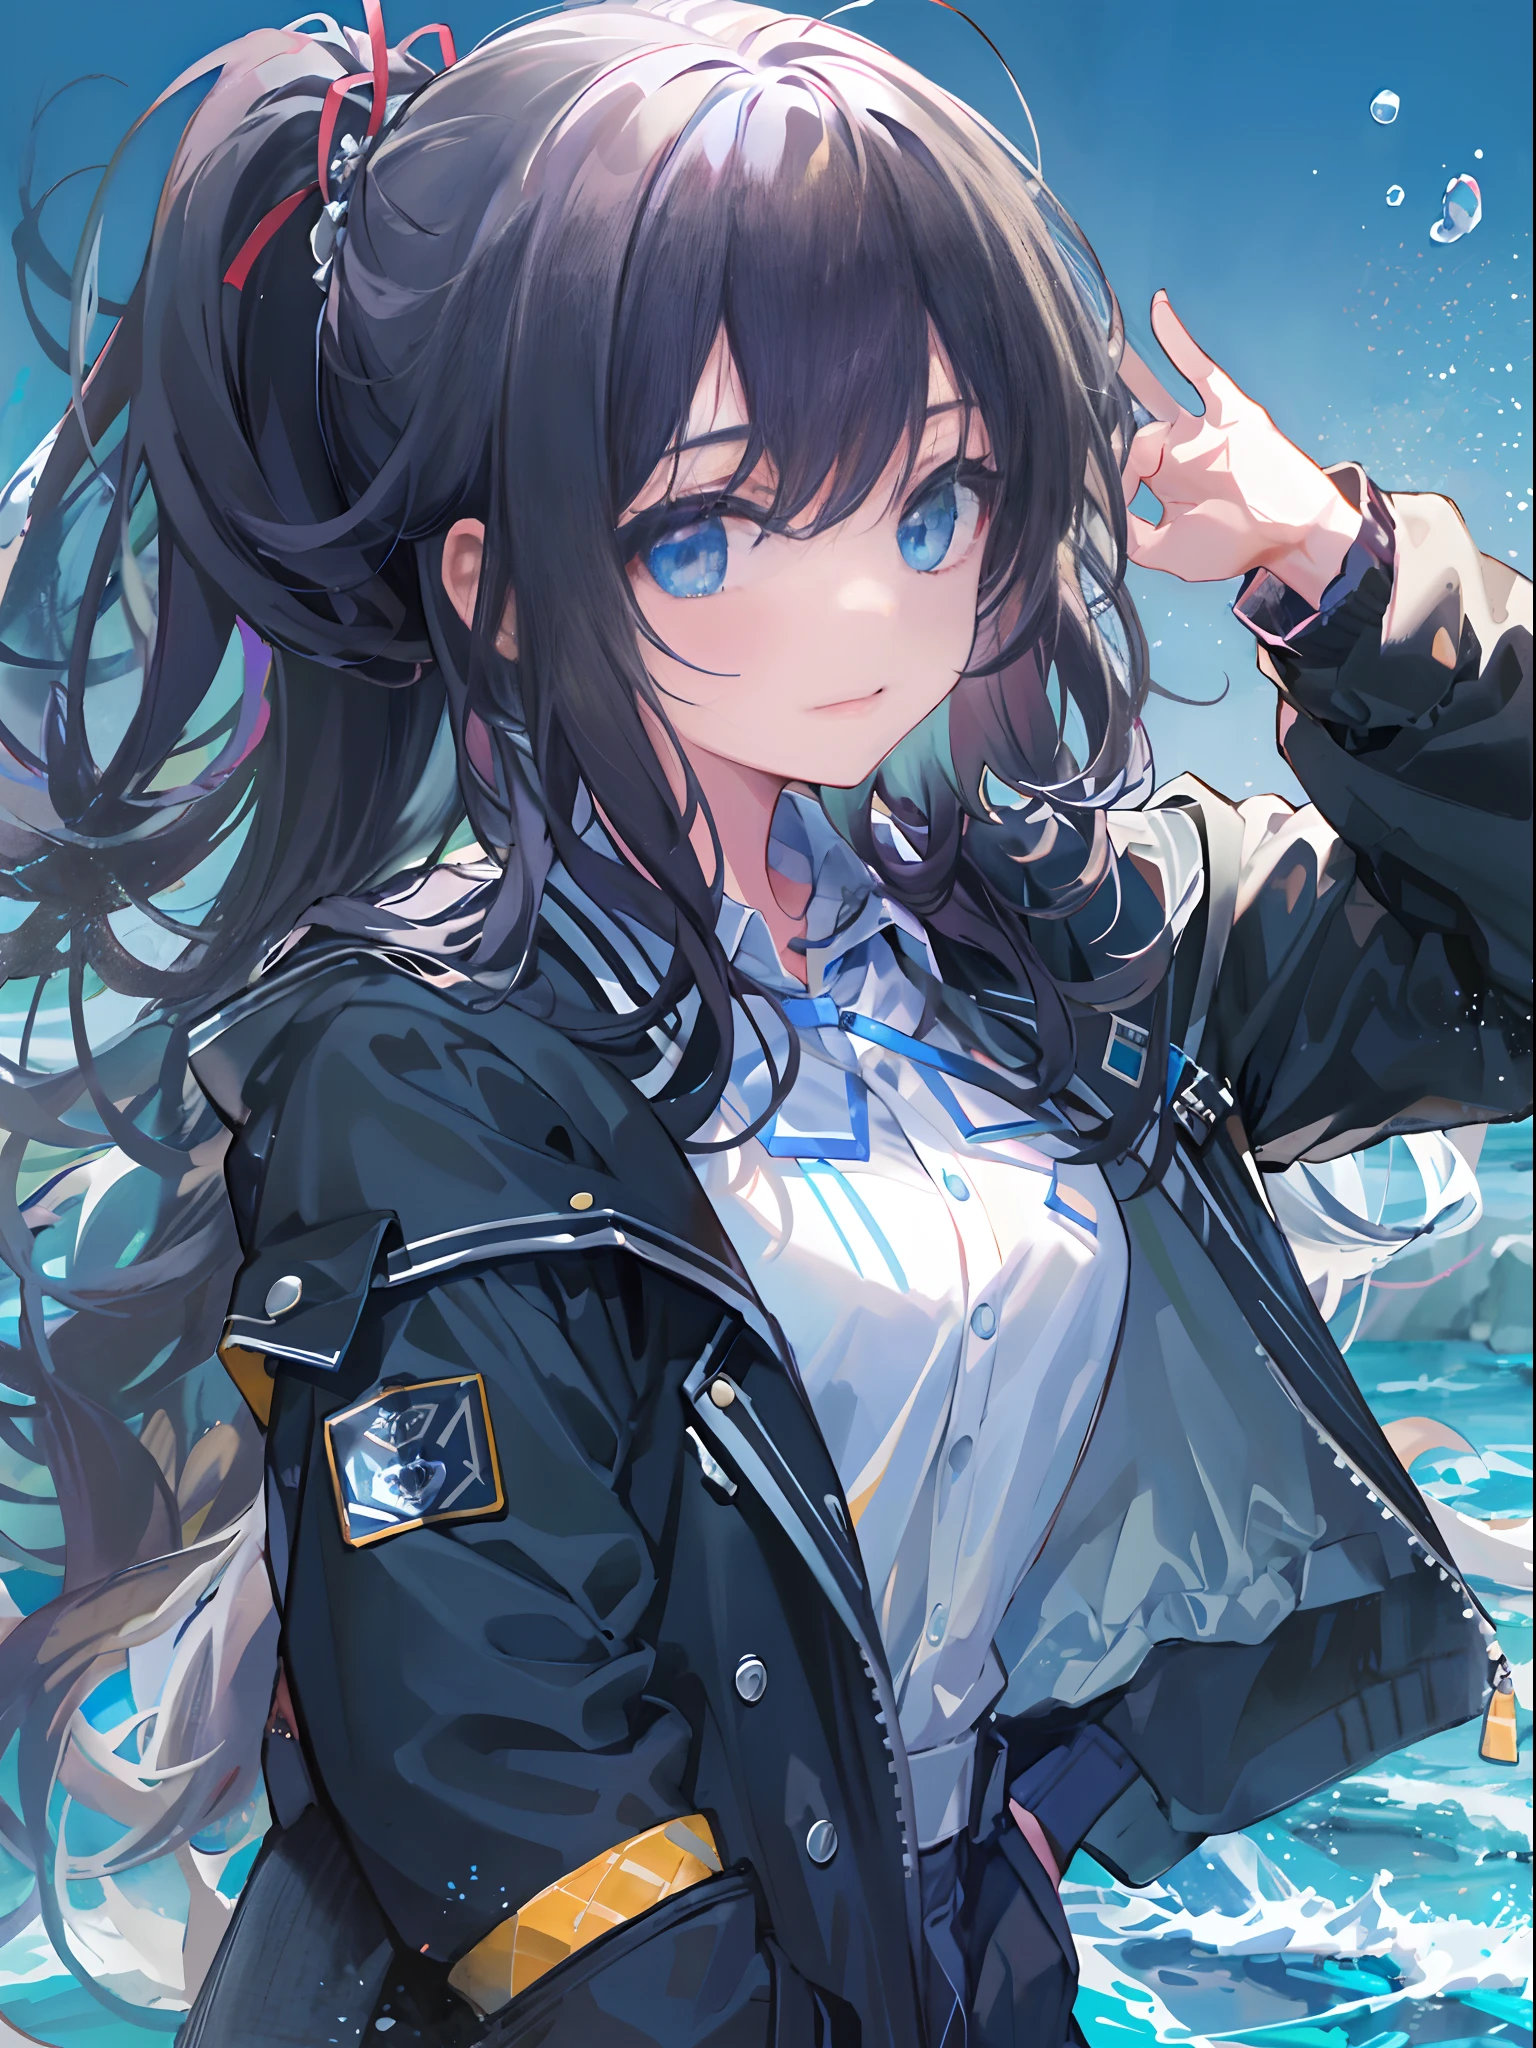 ((top-quality)), ((tmasterpiece)), ((ultra - detailed)), (Extremely Delicately Beautiful), Girl vs, solo, Cold attitude,((Black jacket)),She is very(Relax)with  the(Settle down)looks,brunette color hair, depth of fields,evilsmile,Bubble, Under the water, airbubble,bright light blue eyes,inner colored，Black hair and light blue ends,Cold background,Bob Hair - Linear Art, shorter pants、knee high socks、A white uniform like a school uniform、Light blue ribbon ties、Clothes are sheer、Hands in pockets、pony-tail hair、